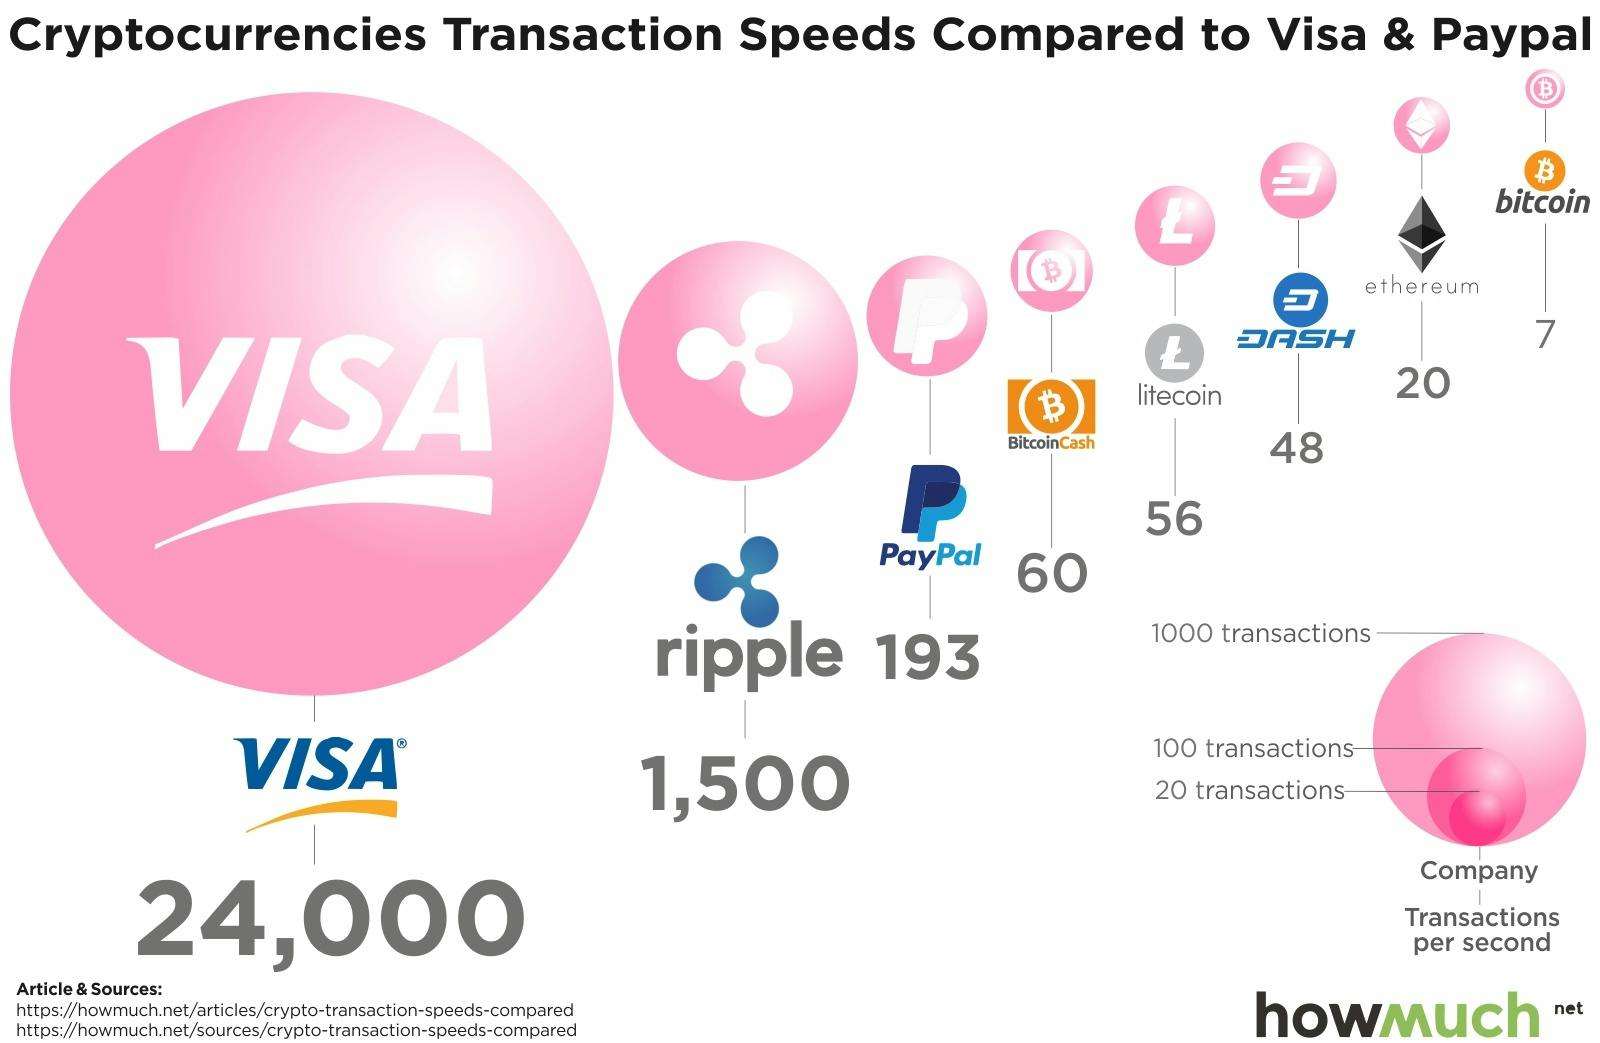 Cryptocurrencies transaction speeds compared to Visa & Paypal